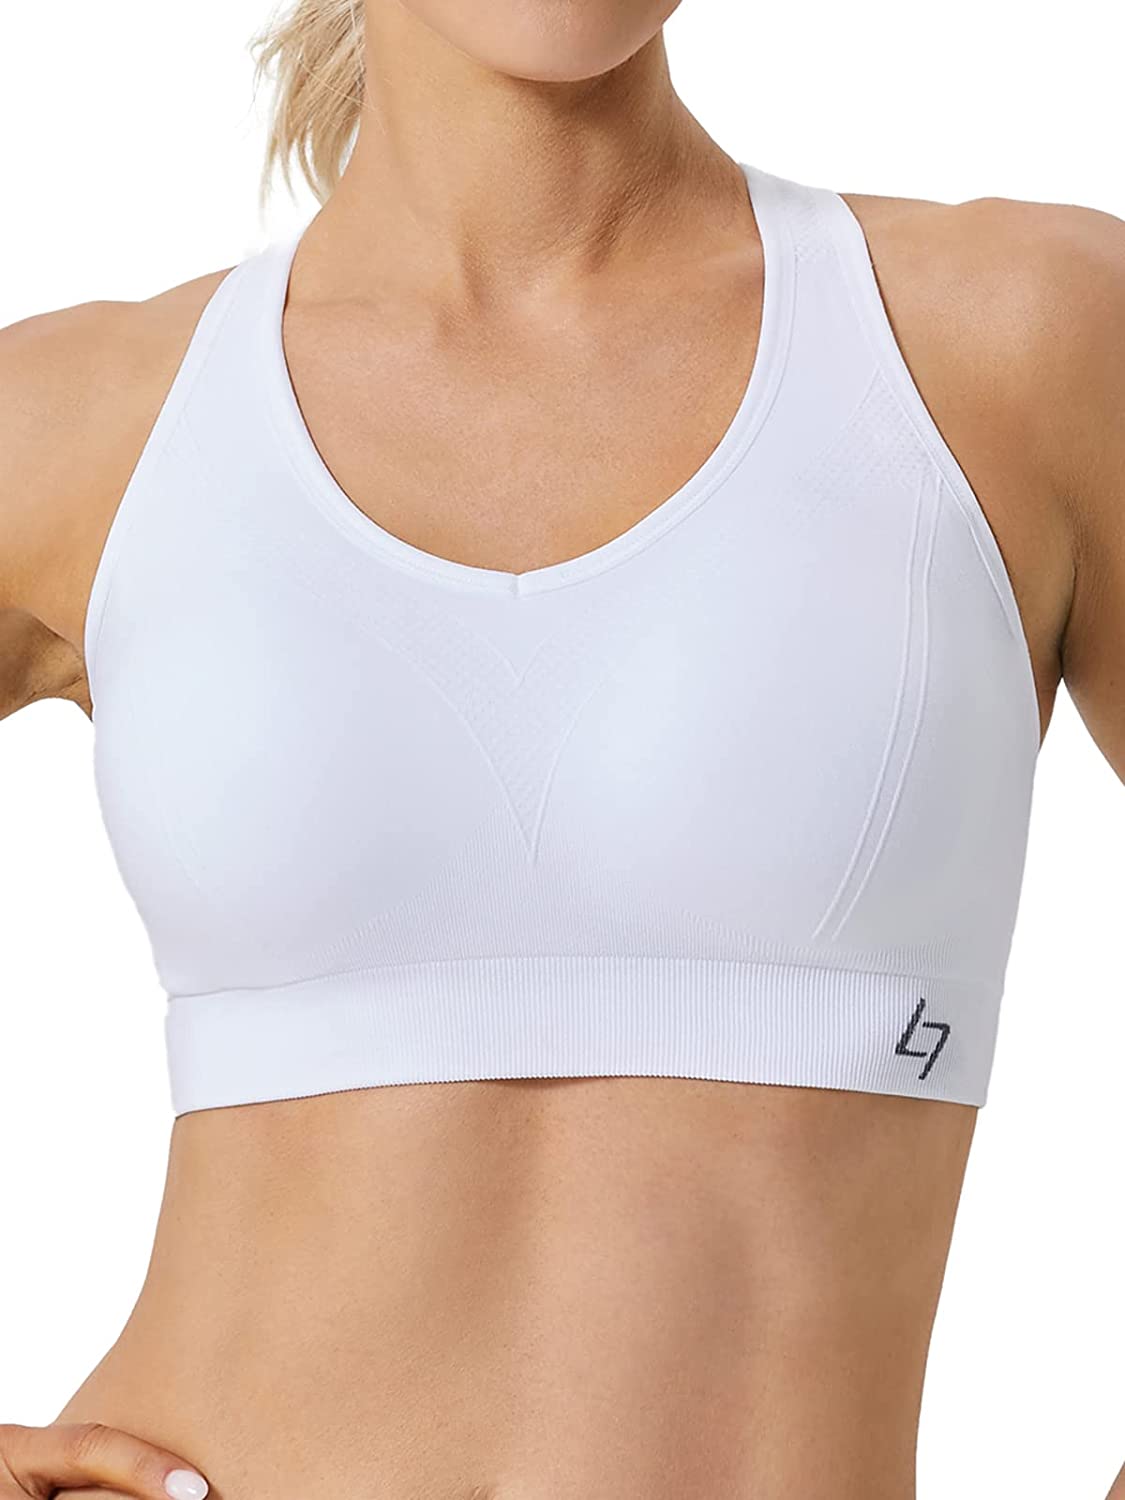 Sports Bras for Women- Padded Seamless High Impact Support for